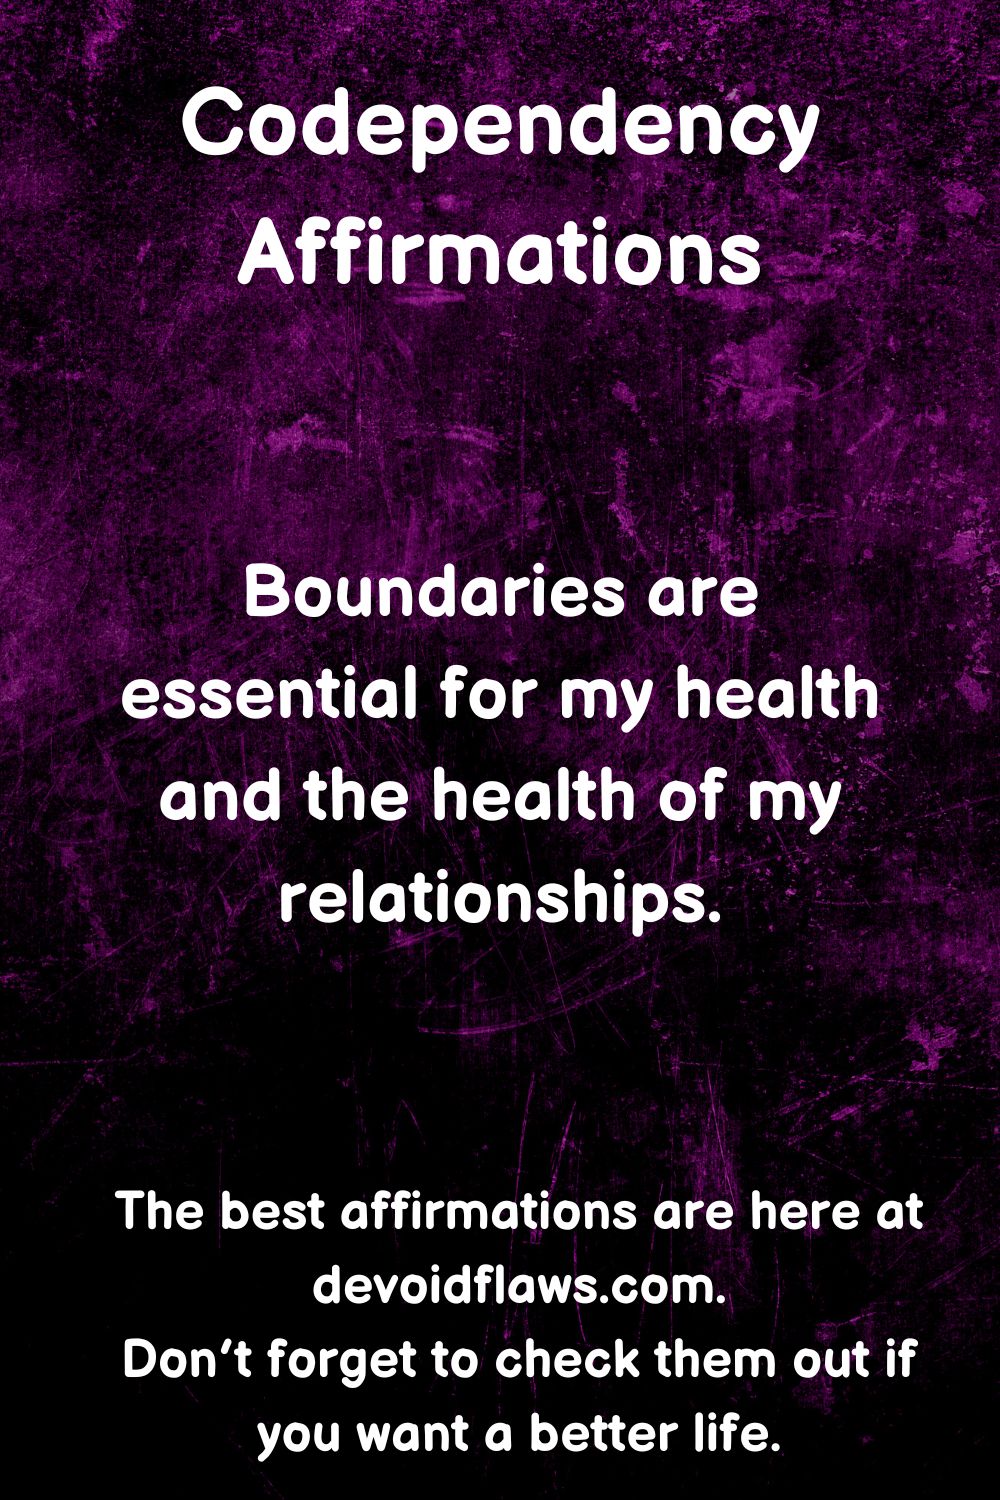 codependency affirmations